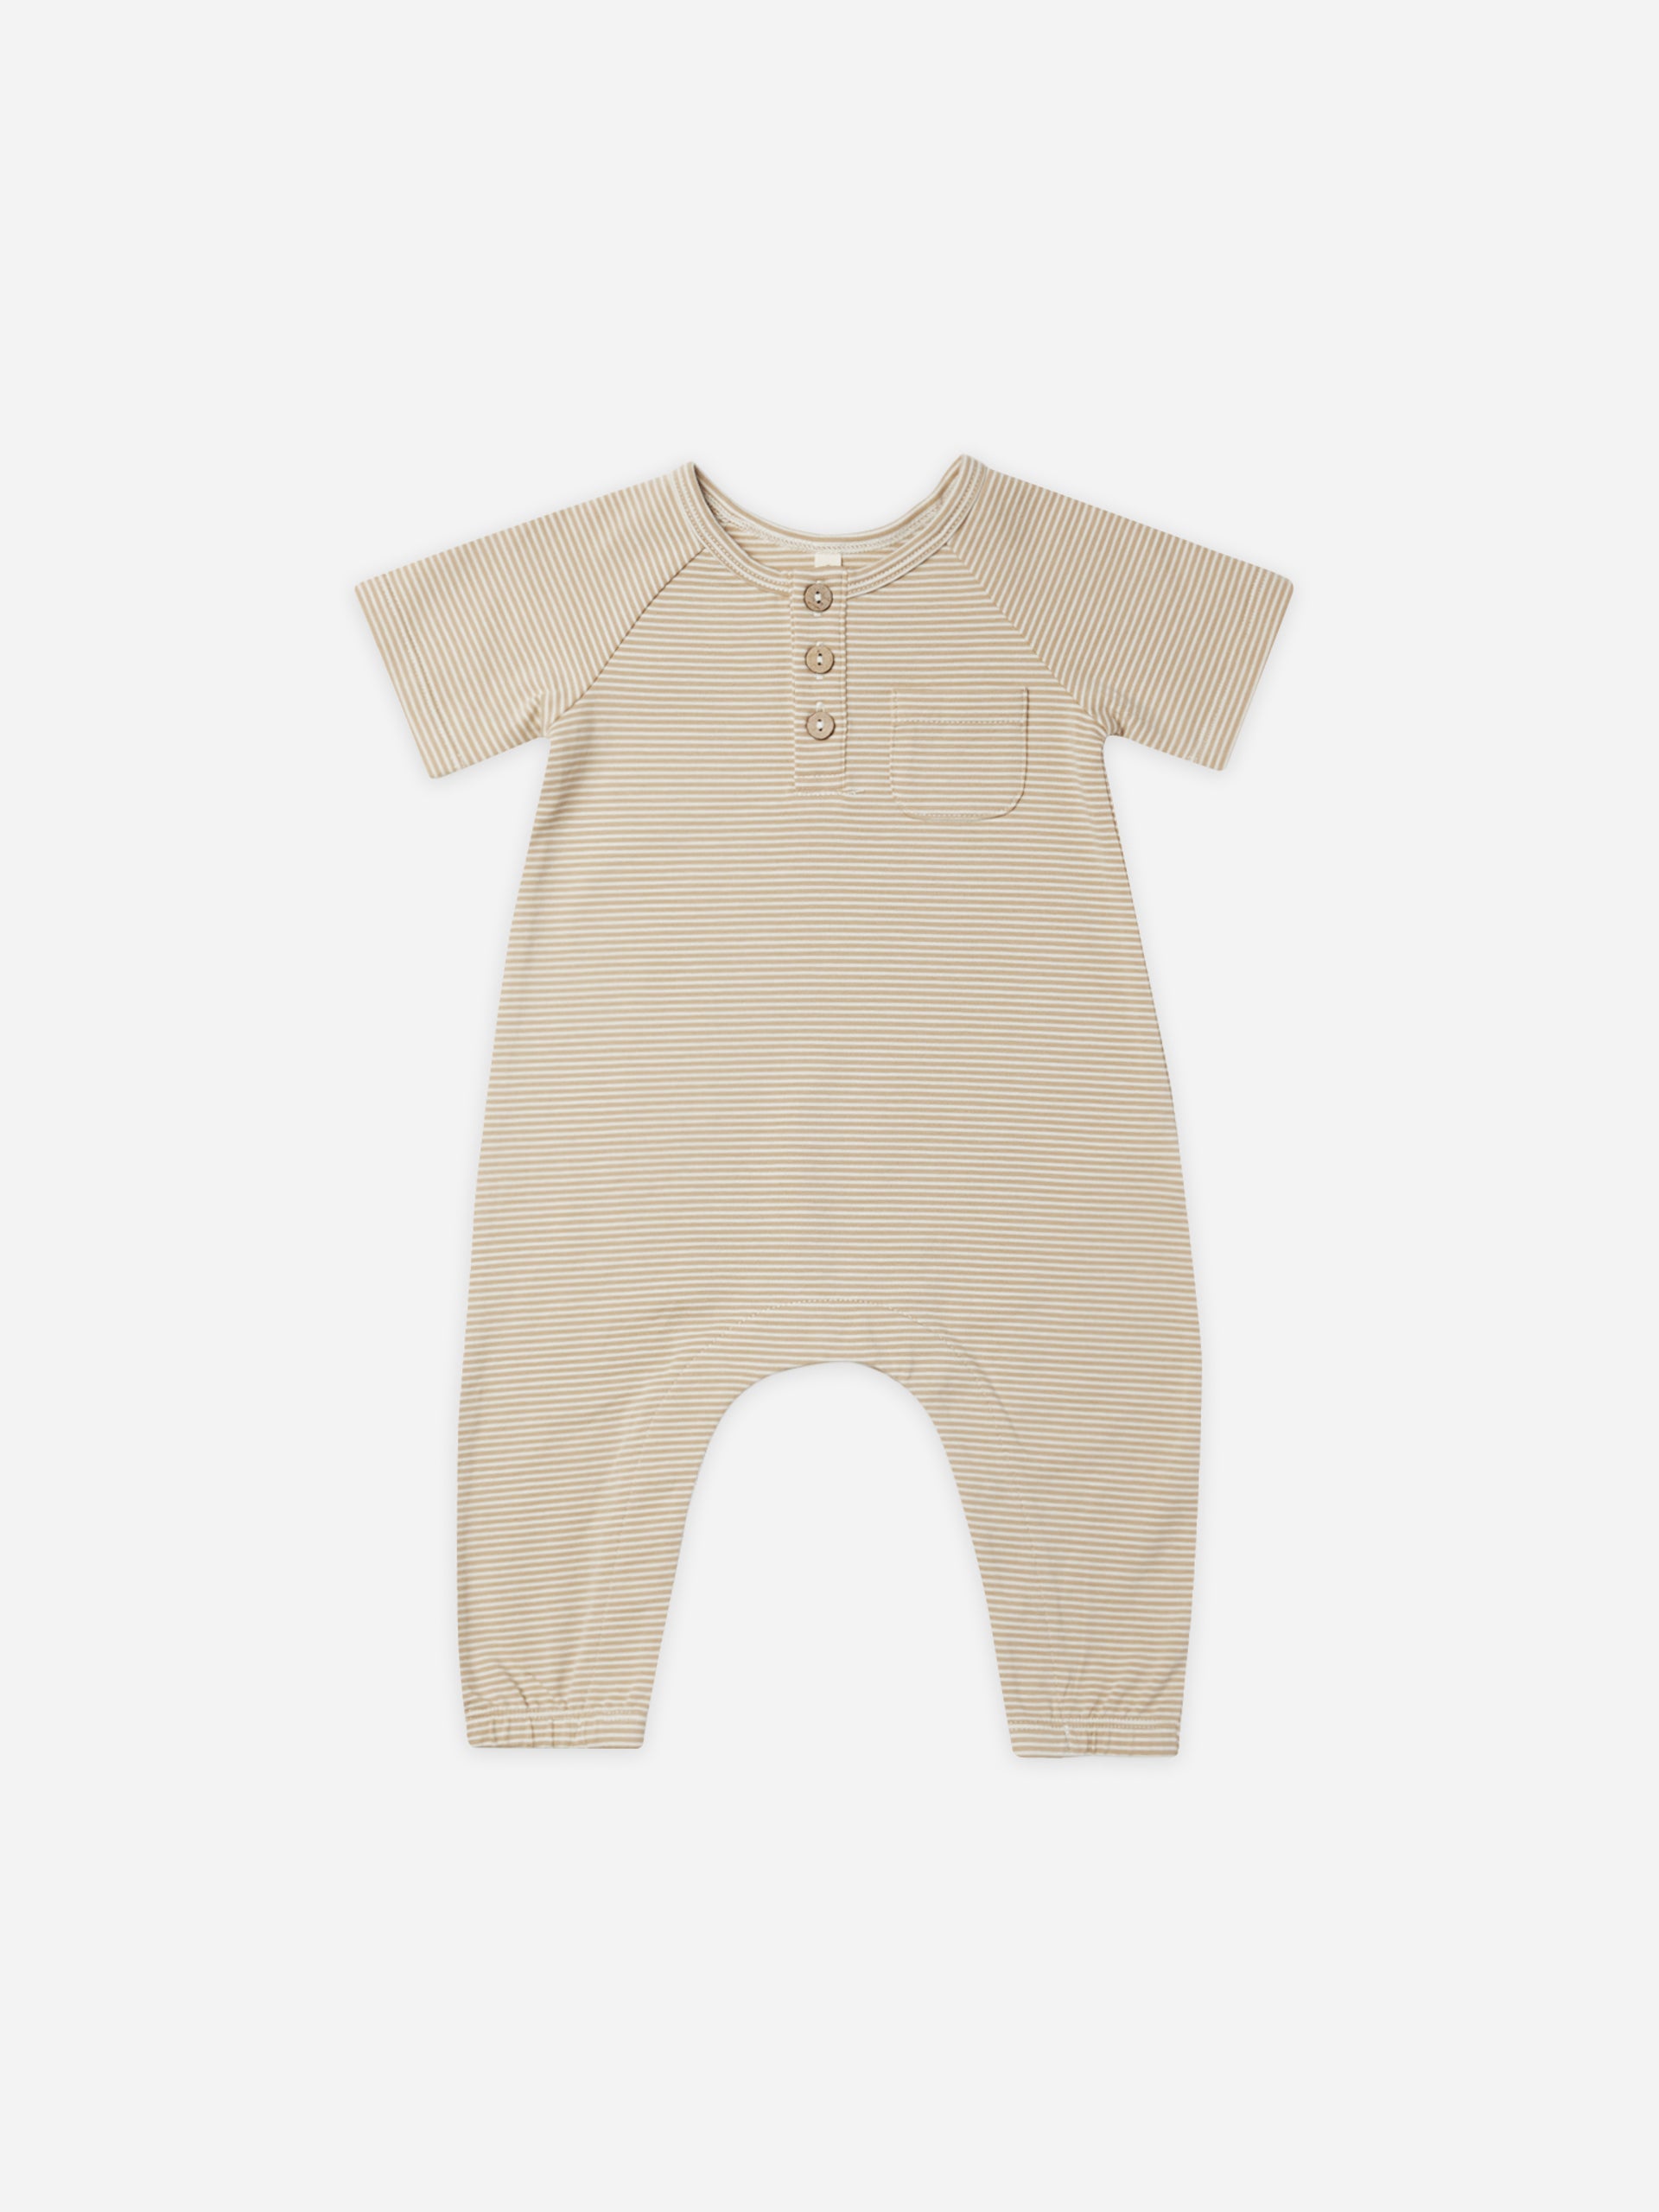 Short Sleeve Jumpsuit || Latte Micro Stripe - Rylee + Cru | Kids Clothes | Trendy Baby Clothes | Modern Infant Outfits |